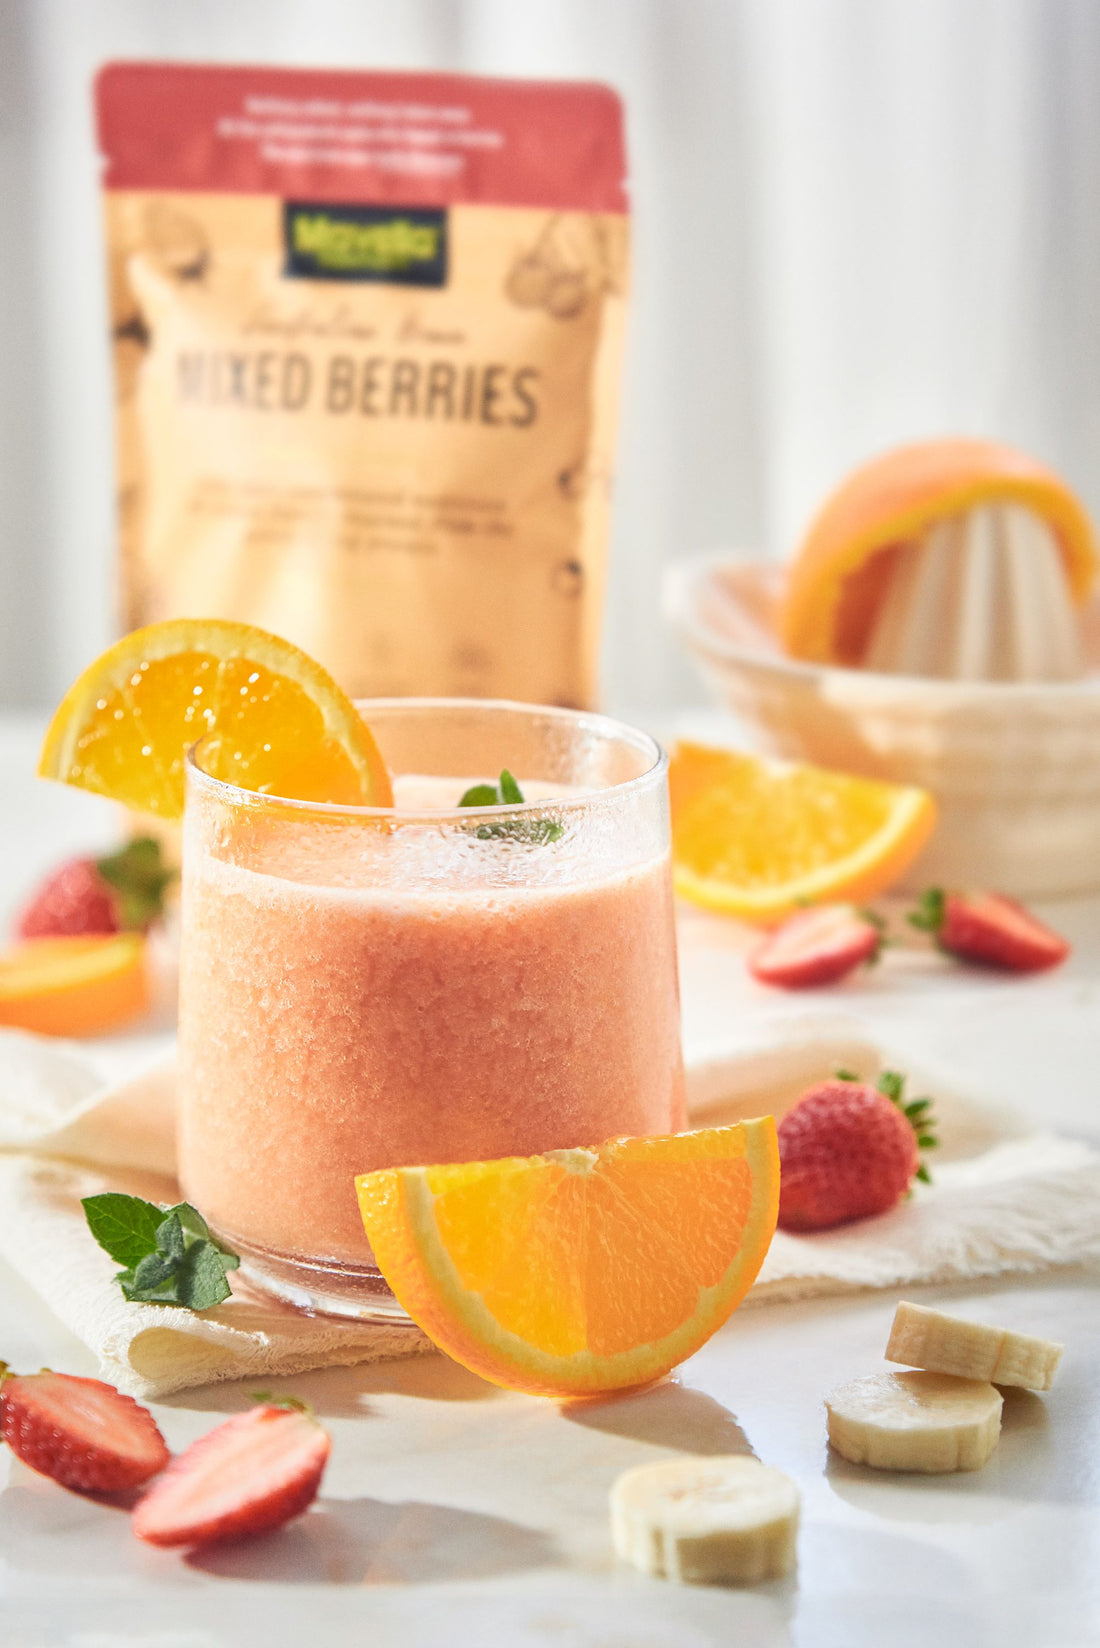 Mixed Berries Sunrise Smoothie